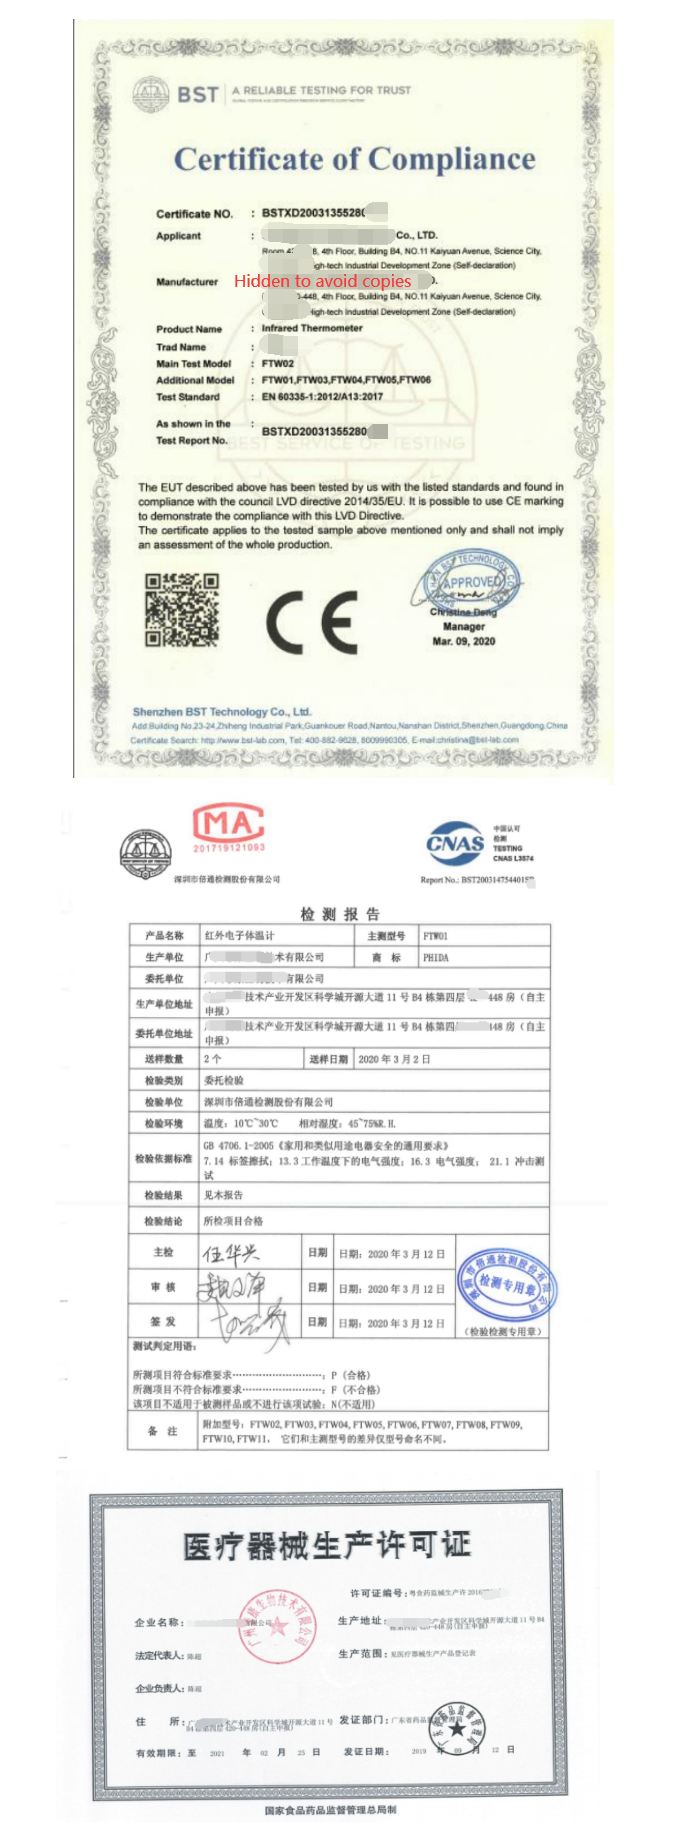 FTW01 Thermometer CE Certification Guangzhou Phicon Biotech Co Ltd